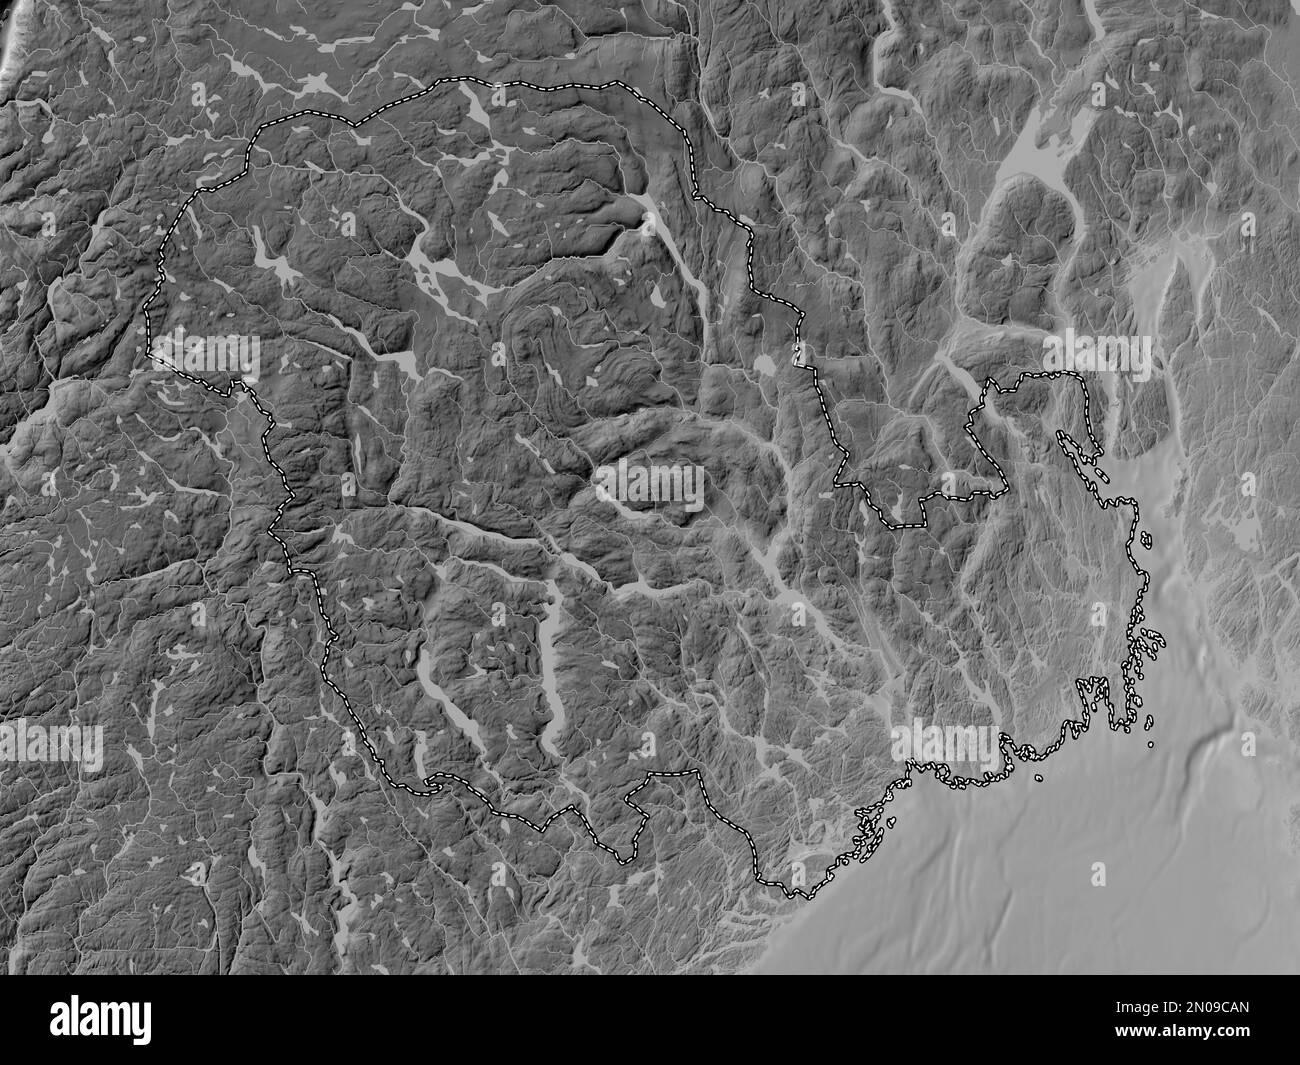 Vestfold og Telemark, county of Norway. Grayscale elevation map with lakes and rivers Stock Photo